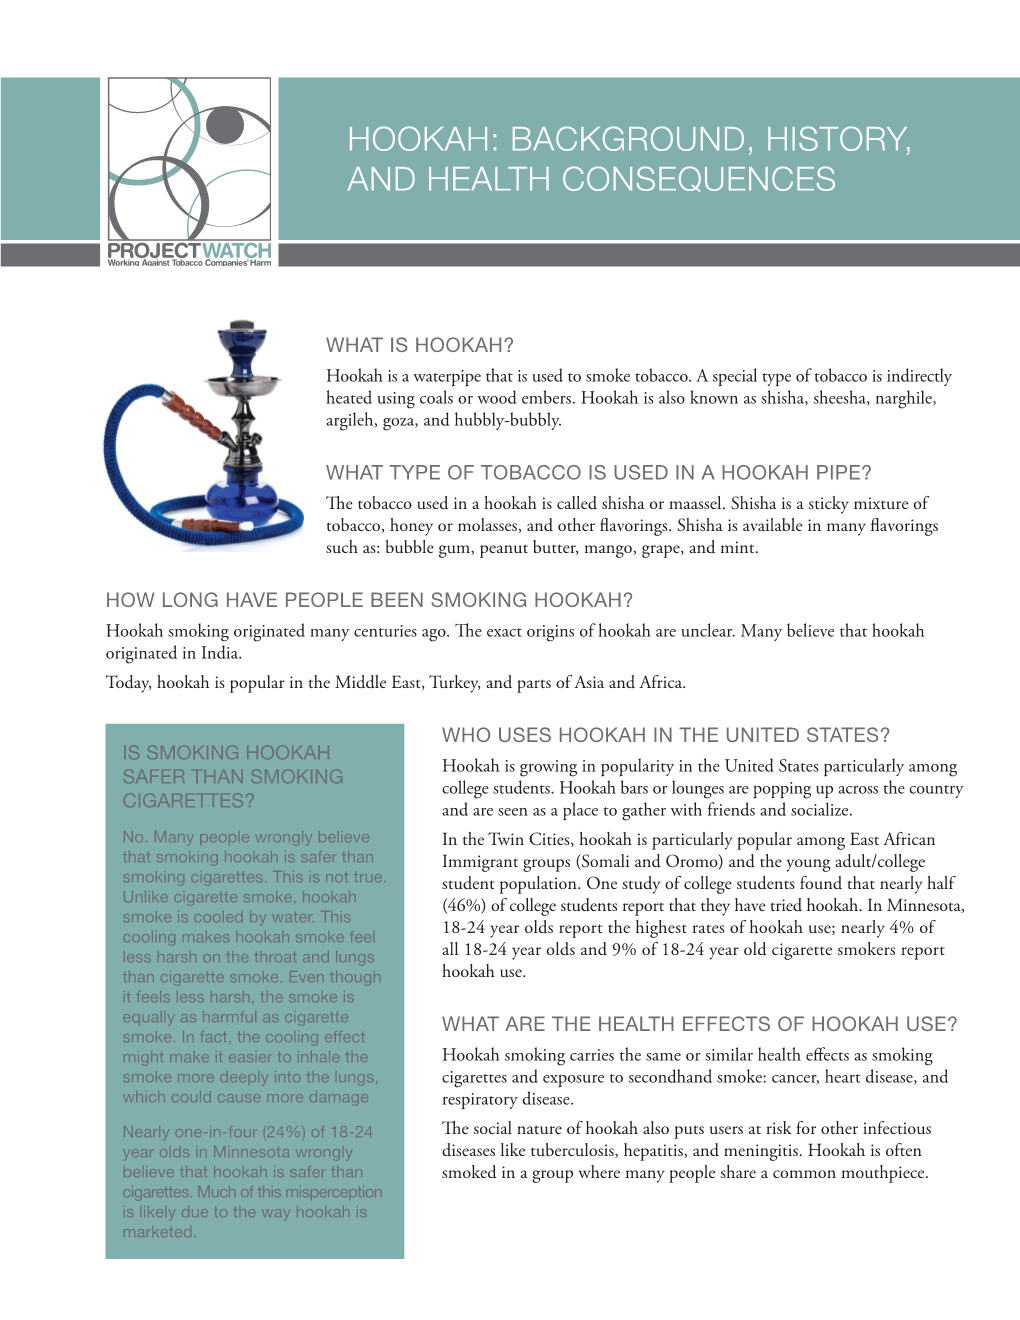 Hookah: Background, History, and Health Consequences